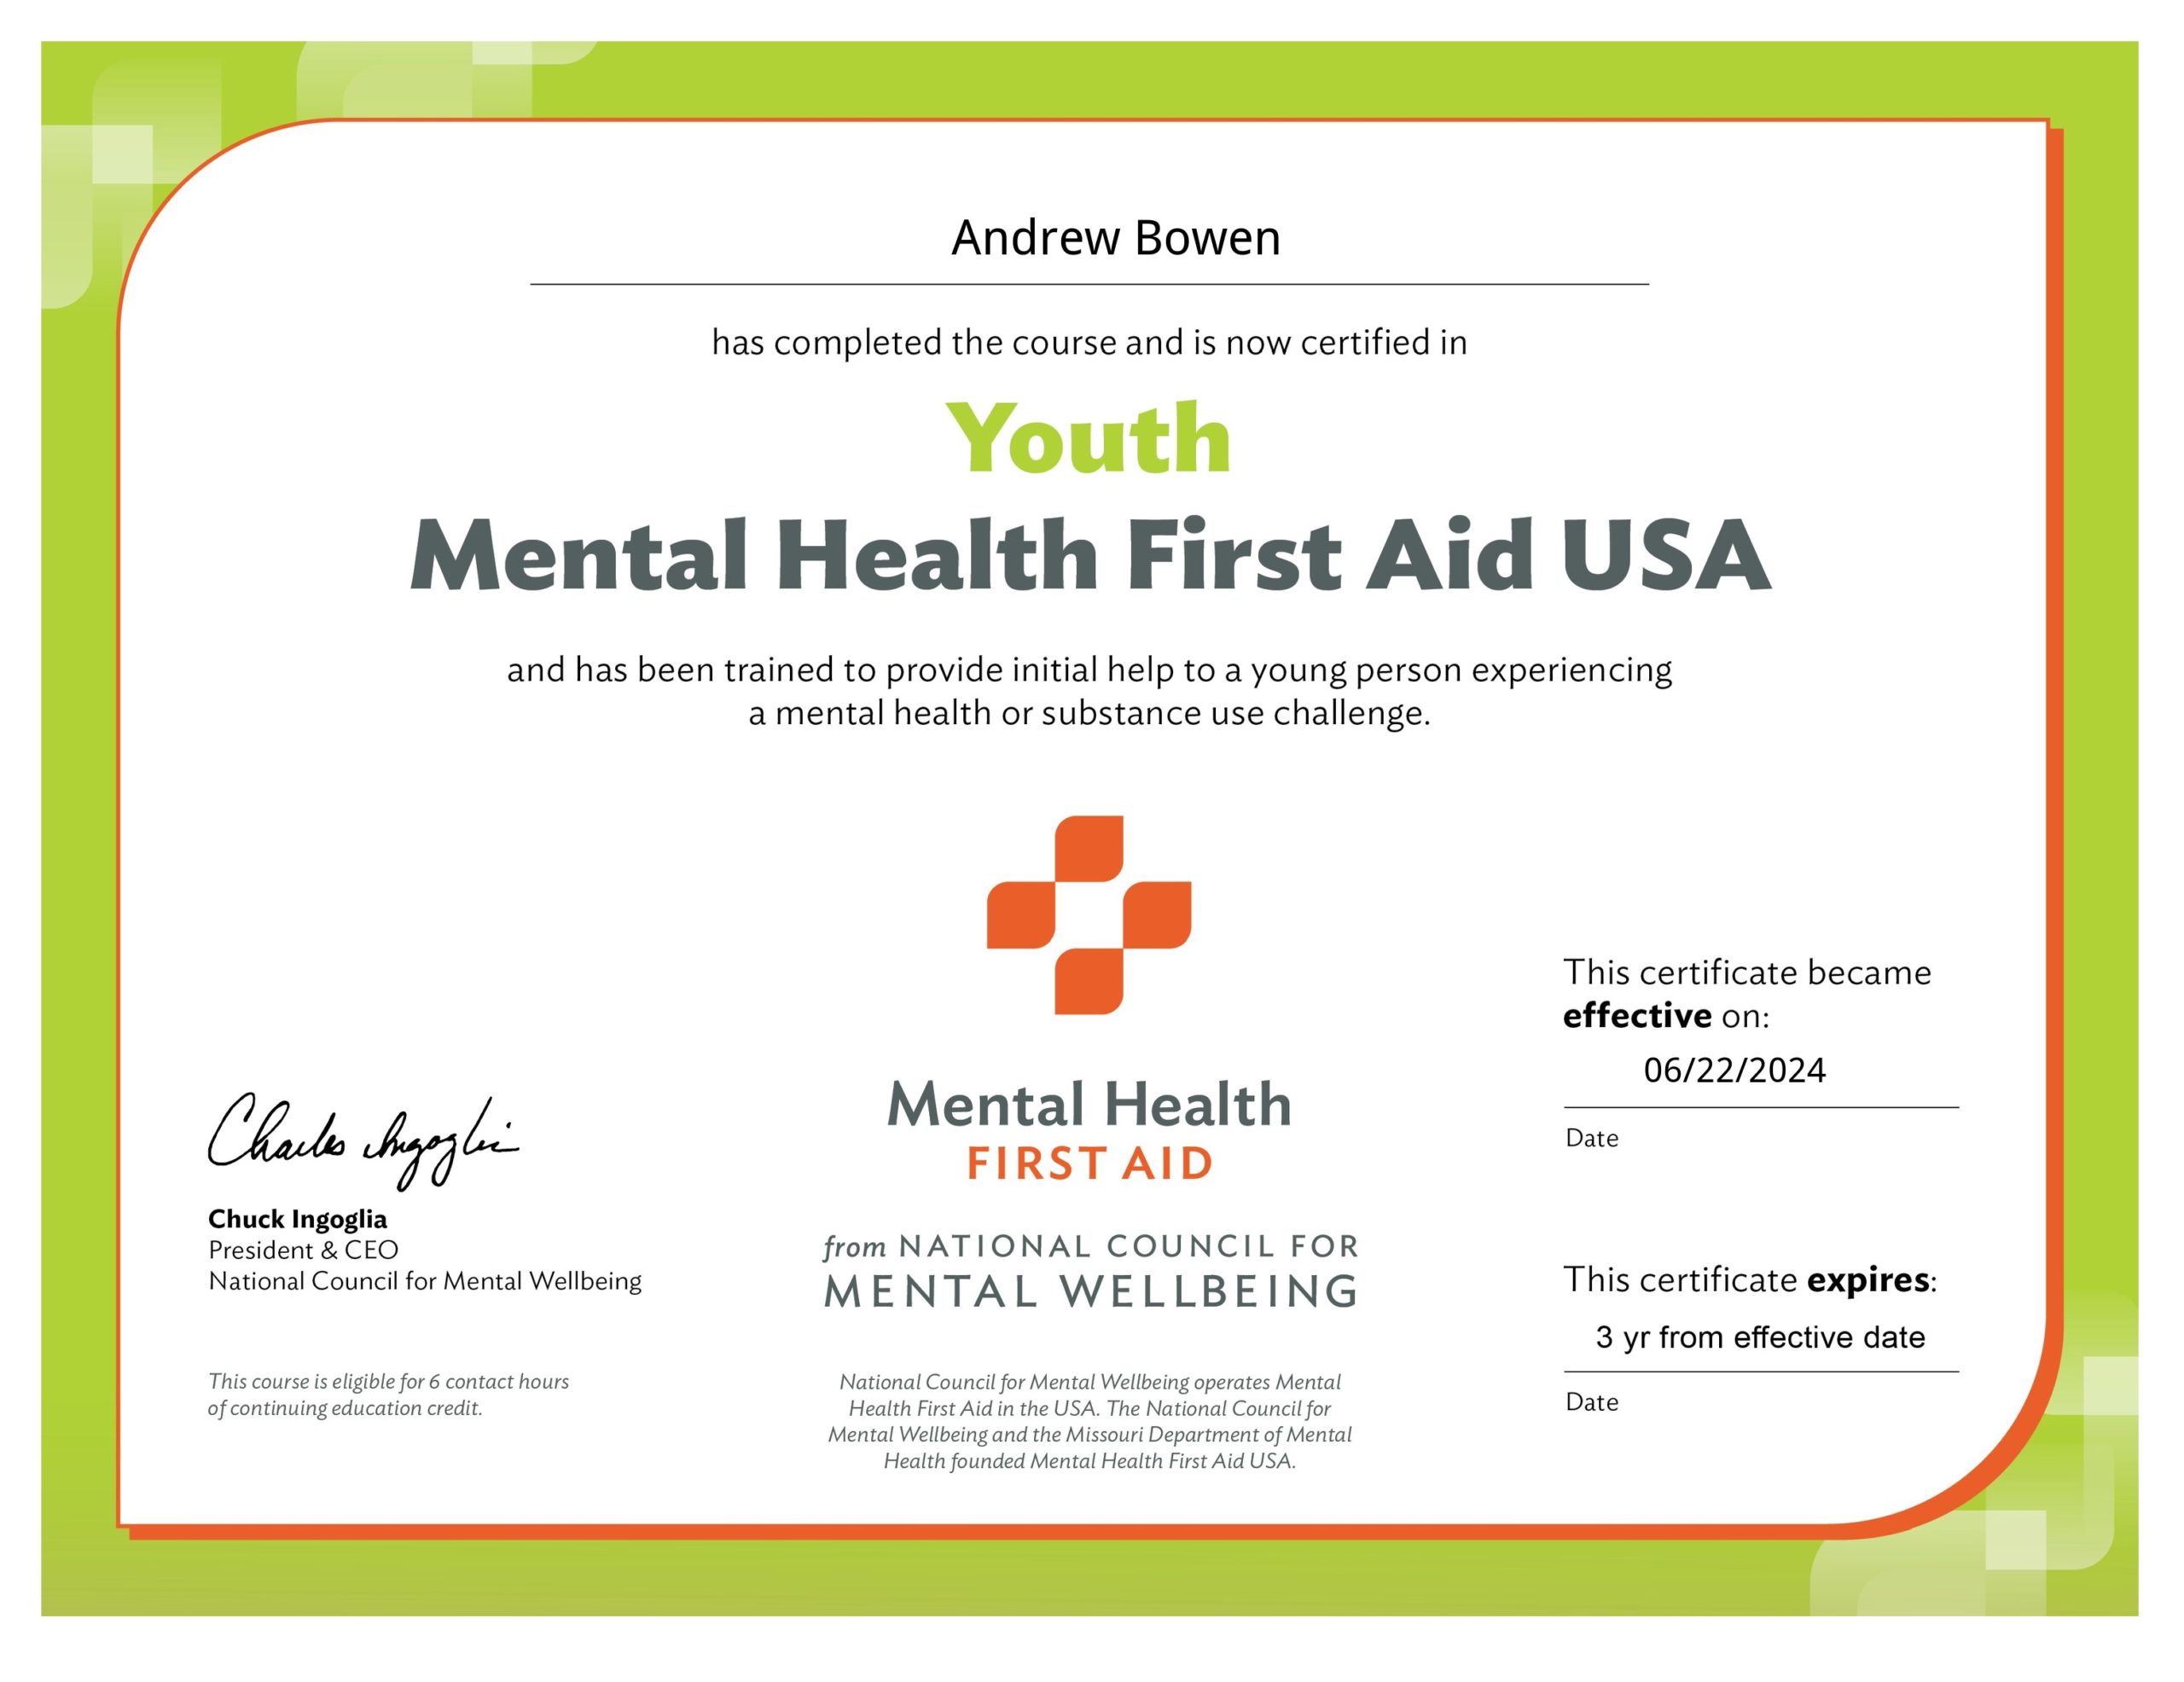 Certificate from Youth Mental Health First Aid for Andrew Bowen